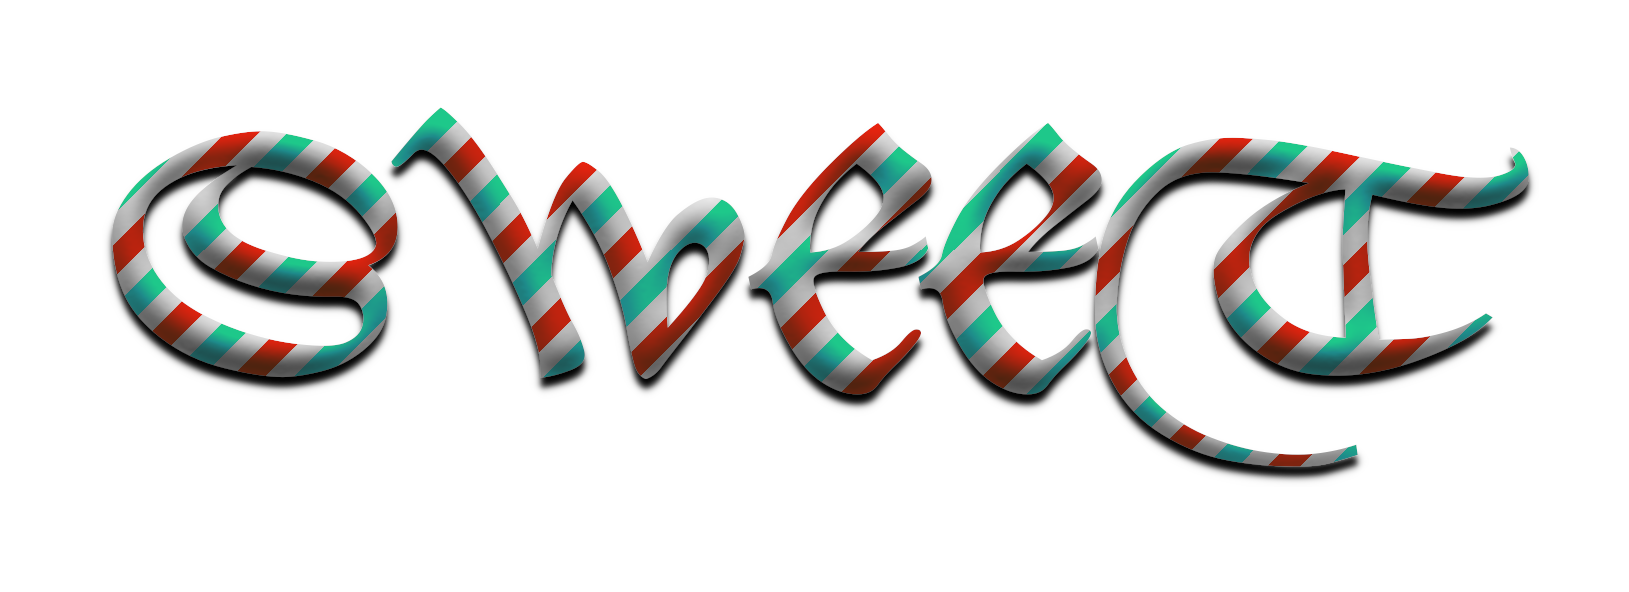 Candy-Cane-Test_No-Christmas_RD.png